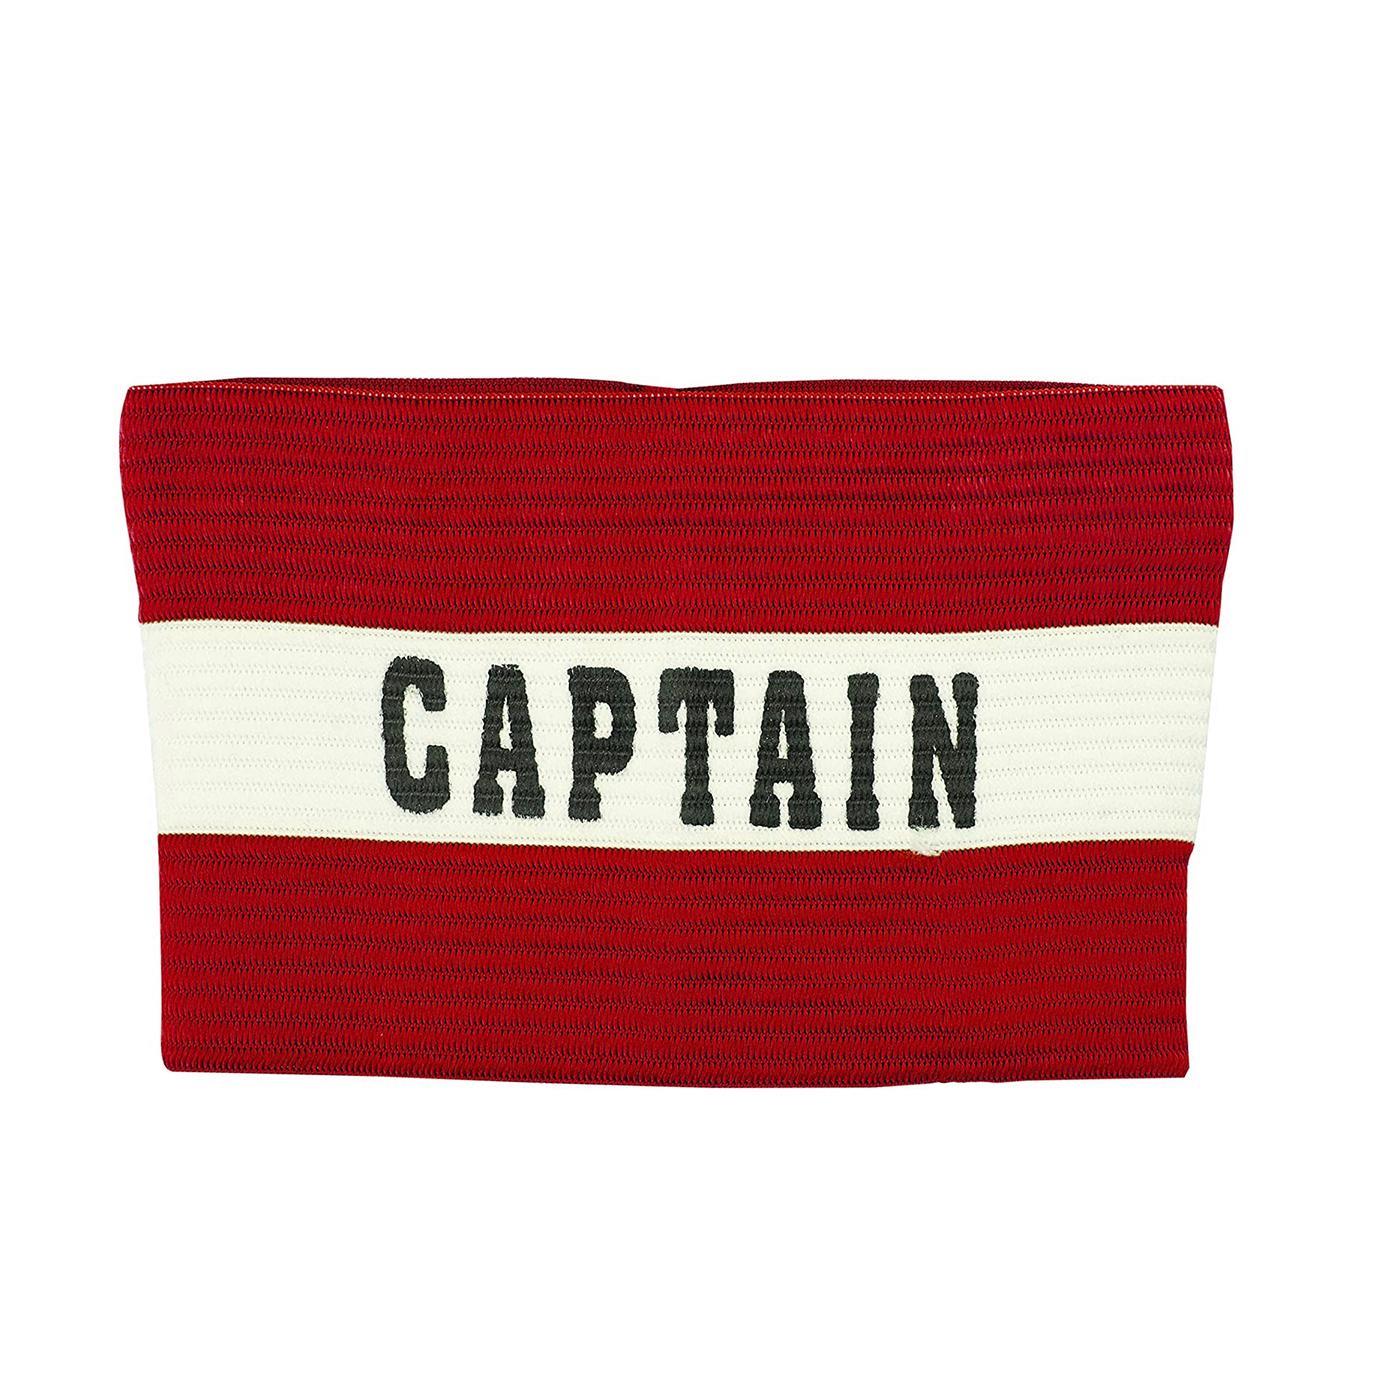 Precision Unisex Adult Captains Armband (Red) (One Size)